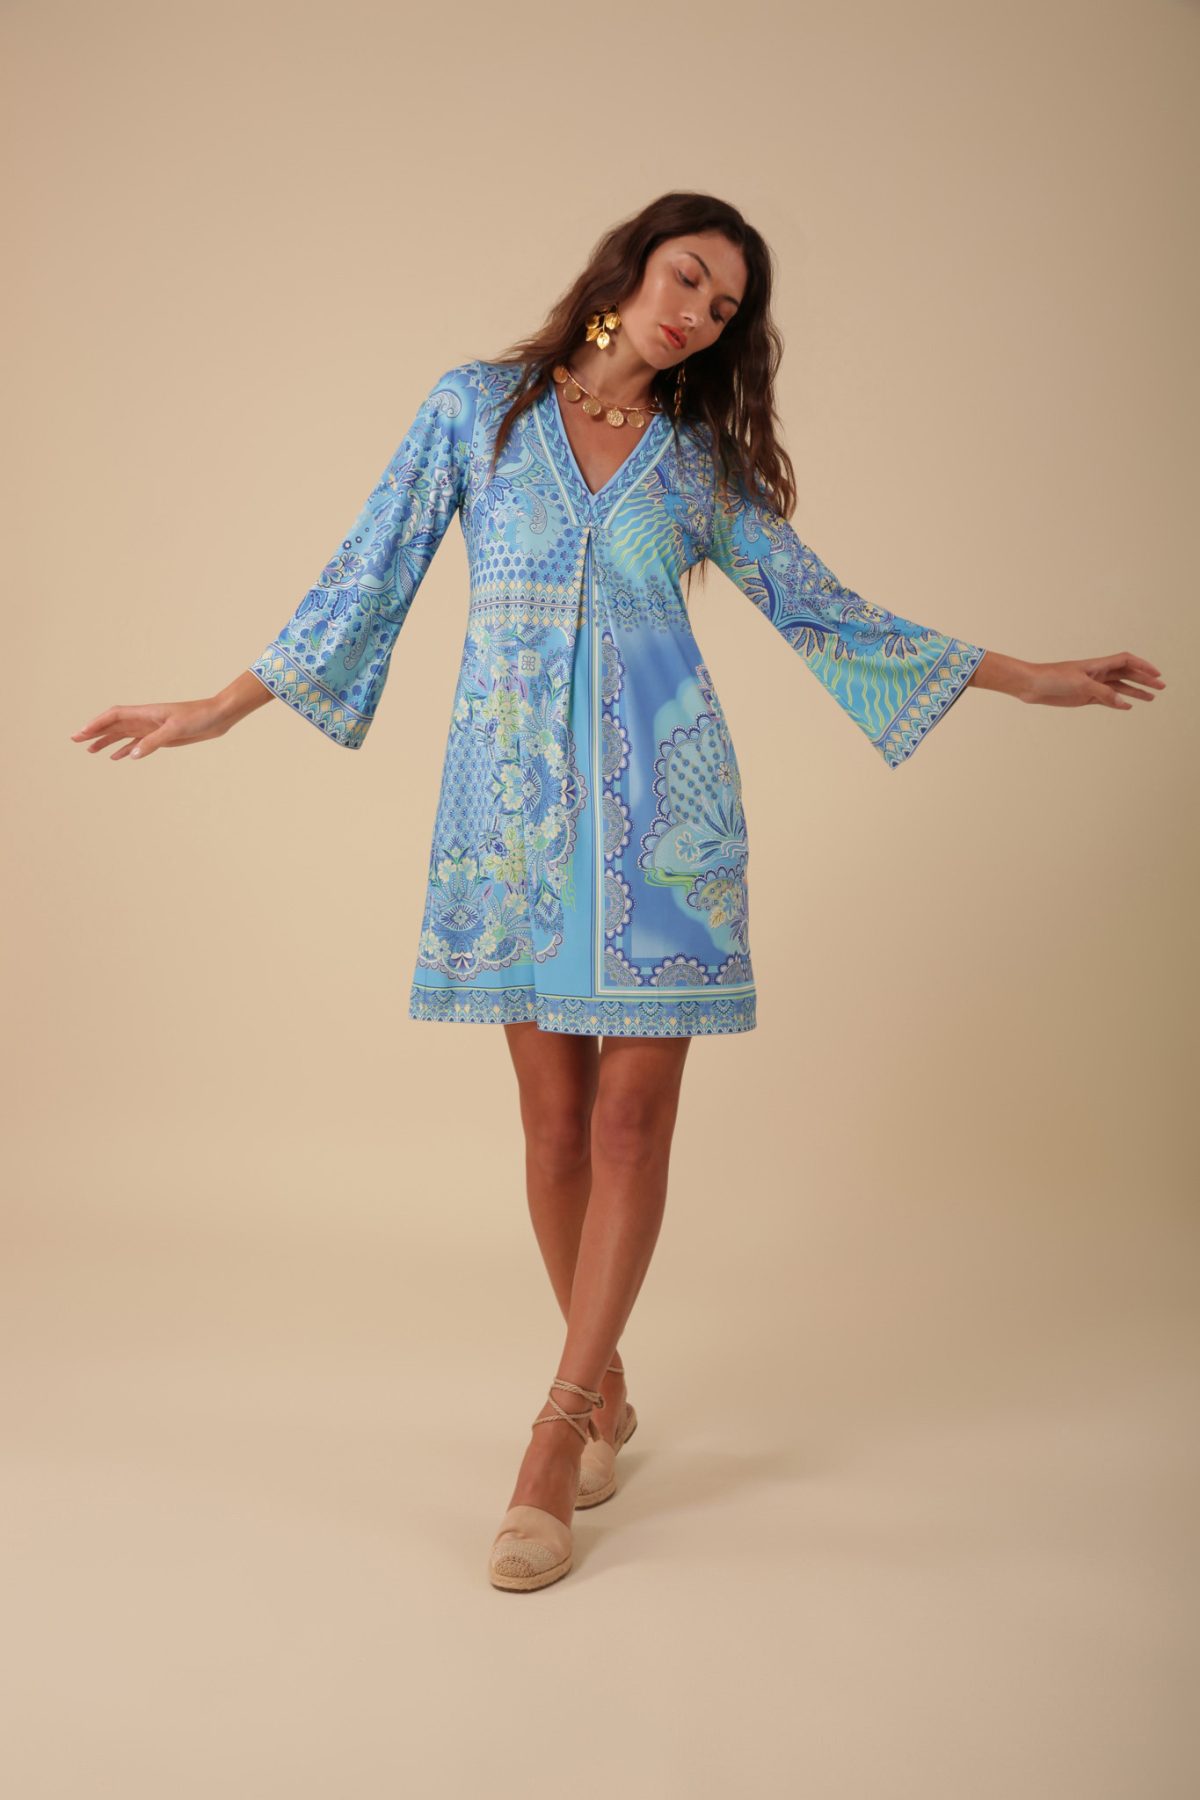 Hale Bob 3ZFL630B Blue Long Beaded Sleeve V Neckline Dress | Ooh Ooh Shoes women's clothing and shoe boutique located in Naples